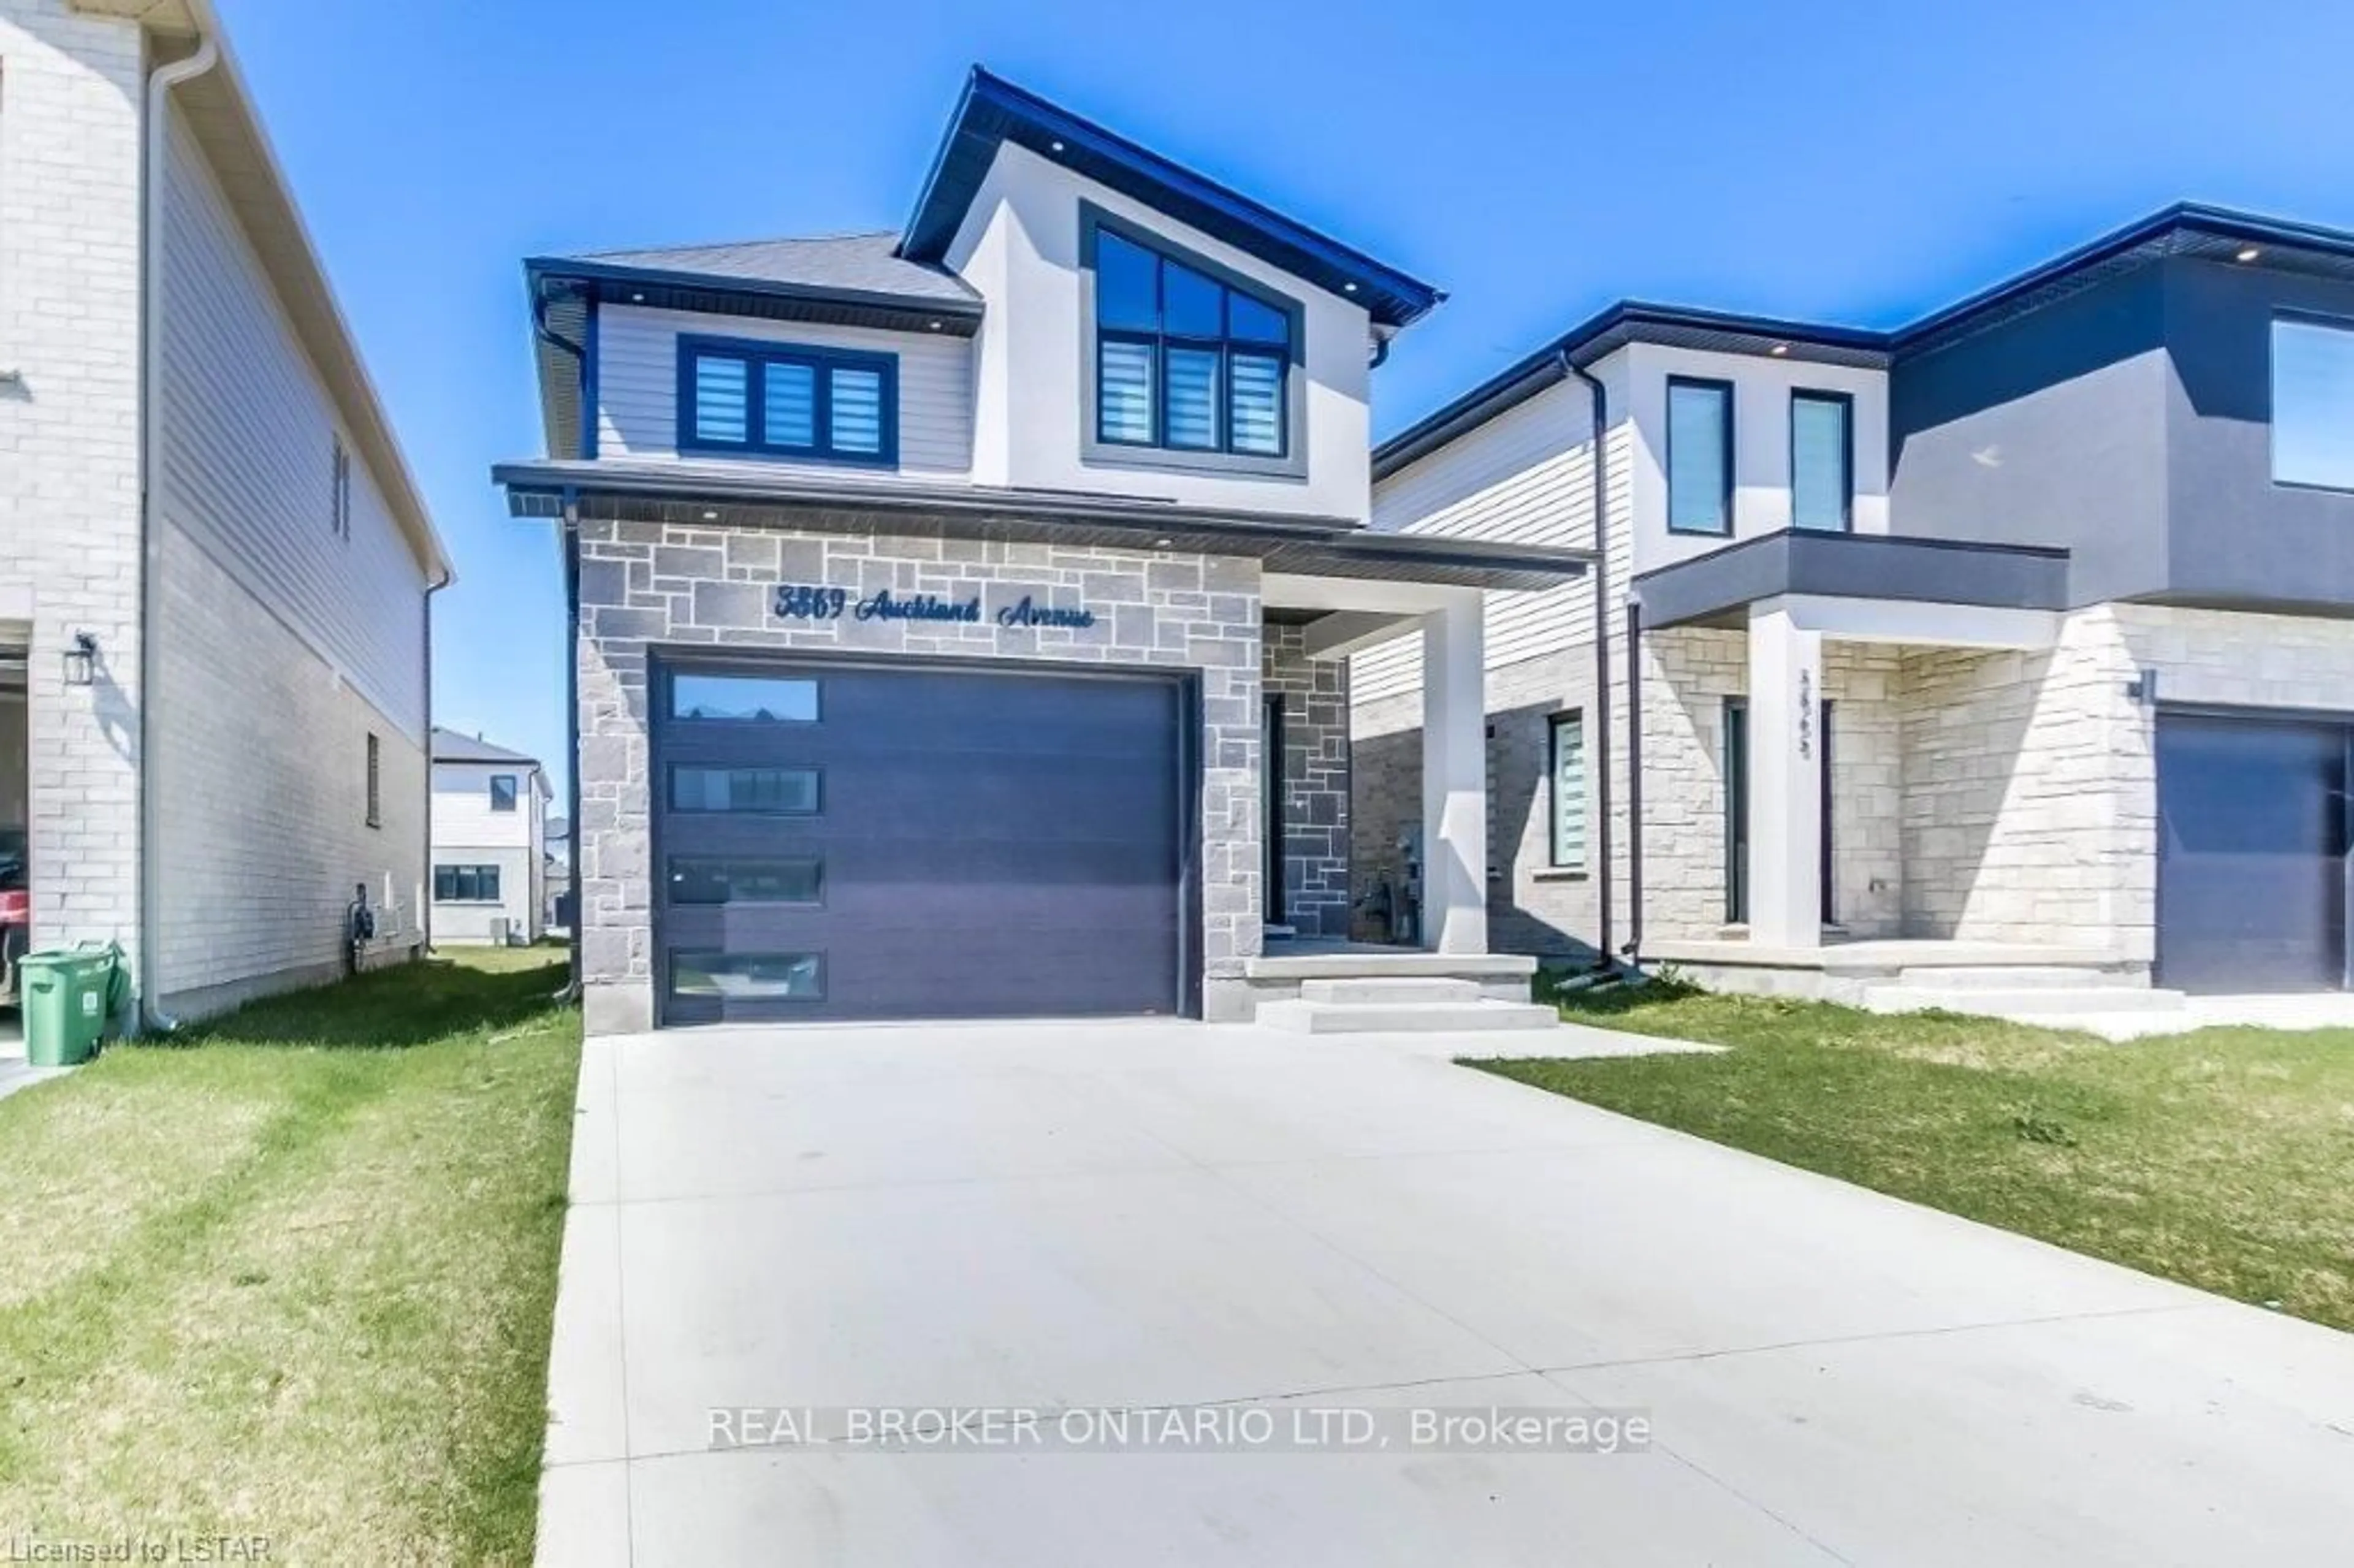 Frontside or backside of a home for 3869 Auckland Avenue, London Ontario N6L 0J2